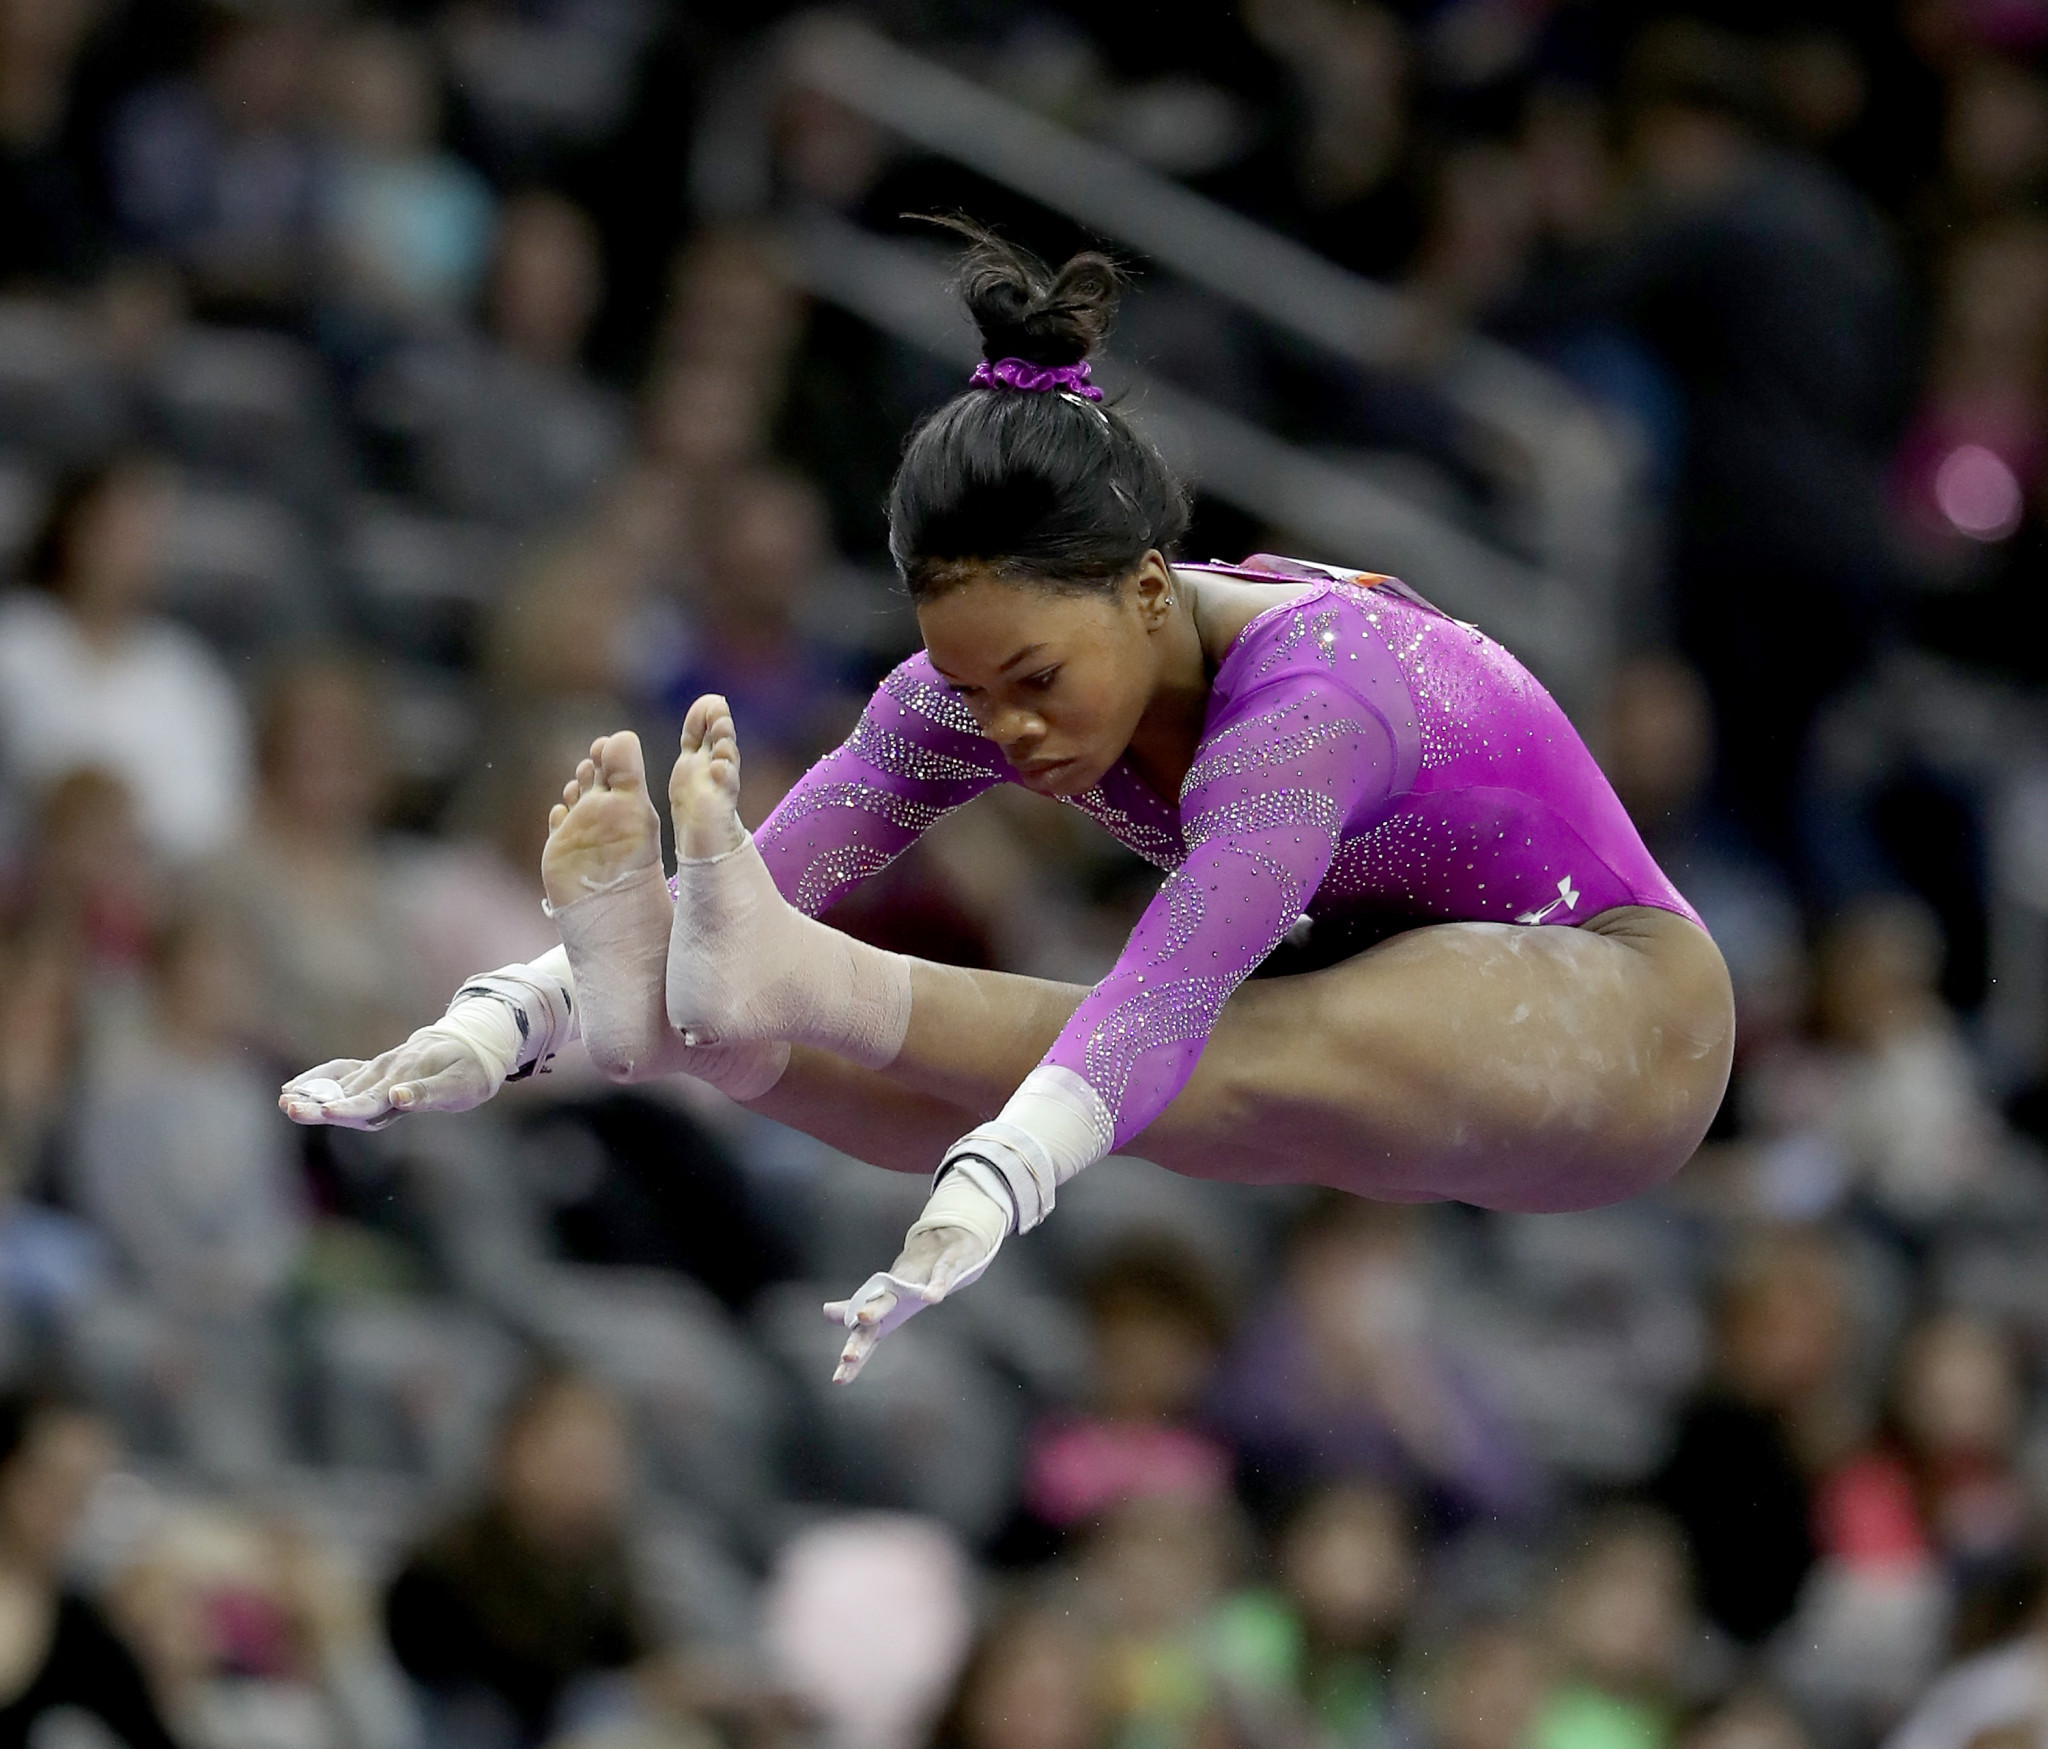 American gymnast Gabby Douglas has been ruled out of the Paris 2024 Olympics due to an ankle injury. GETTY IMAGES